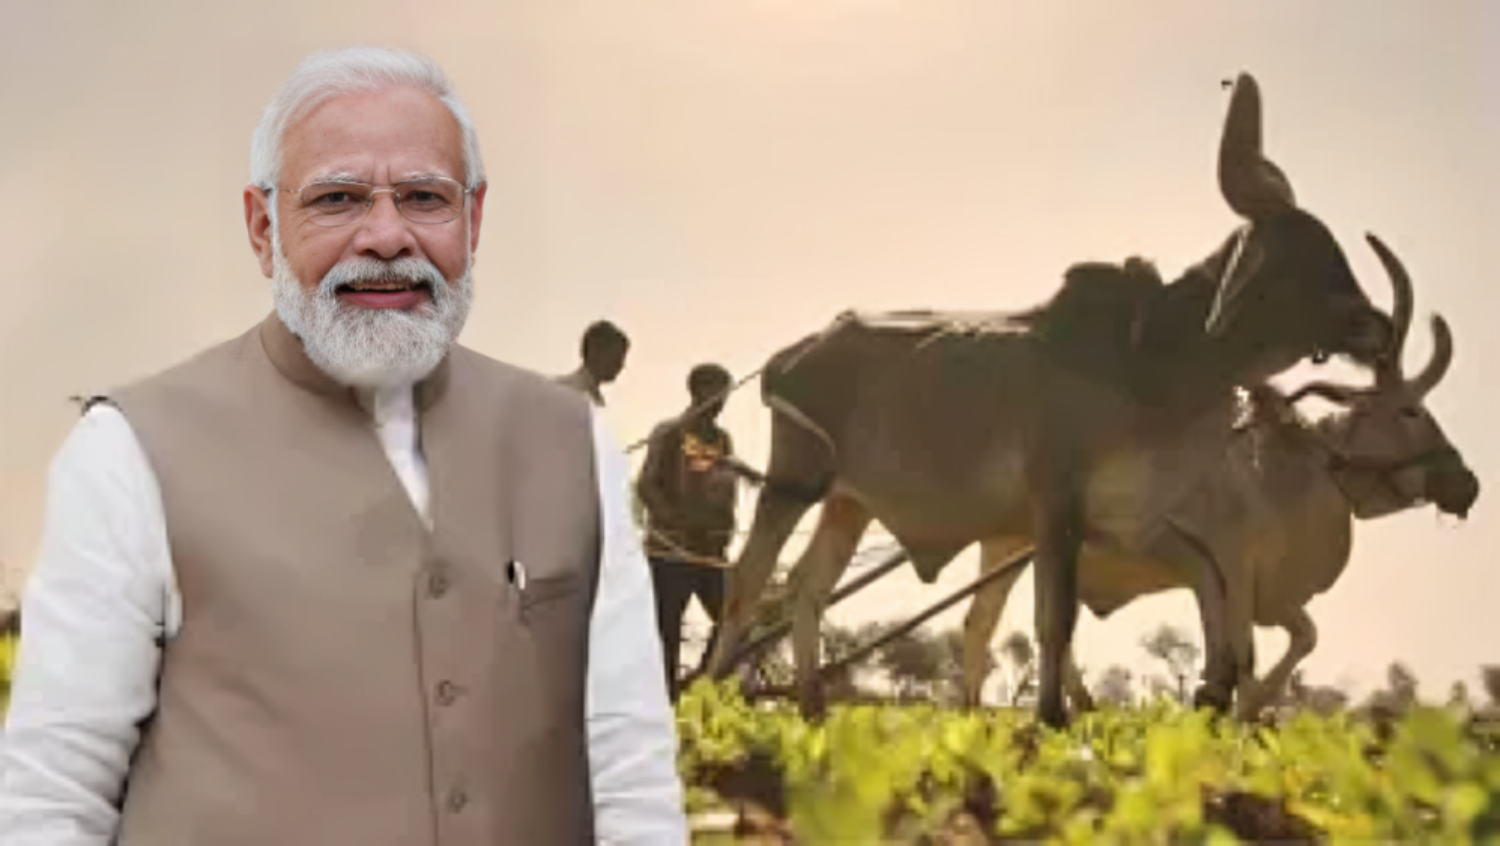 Livestock insurance scheme PM Modi mentioned in GCMMF program, know who can benefit की तस्वीर